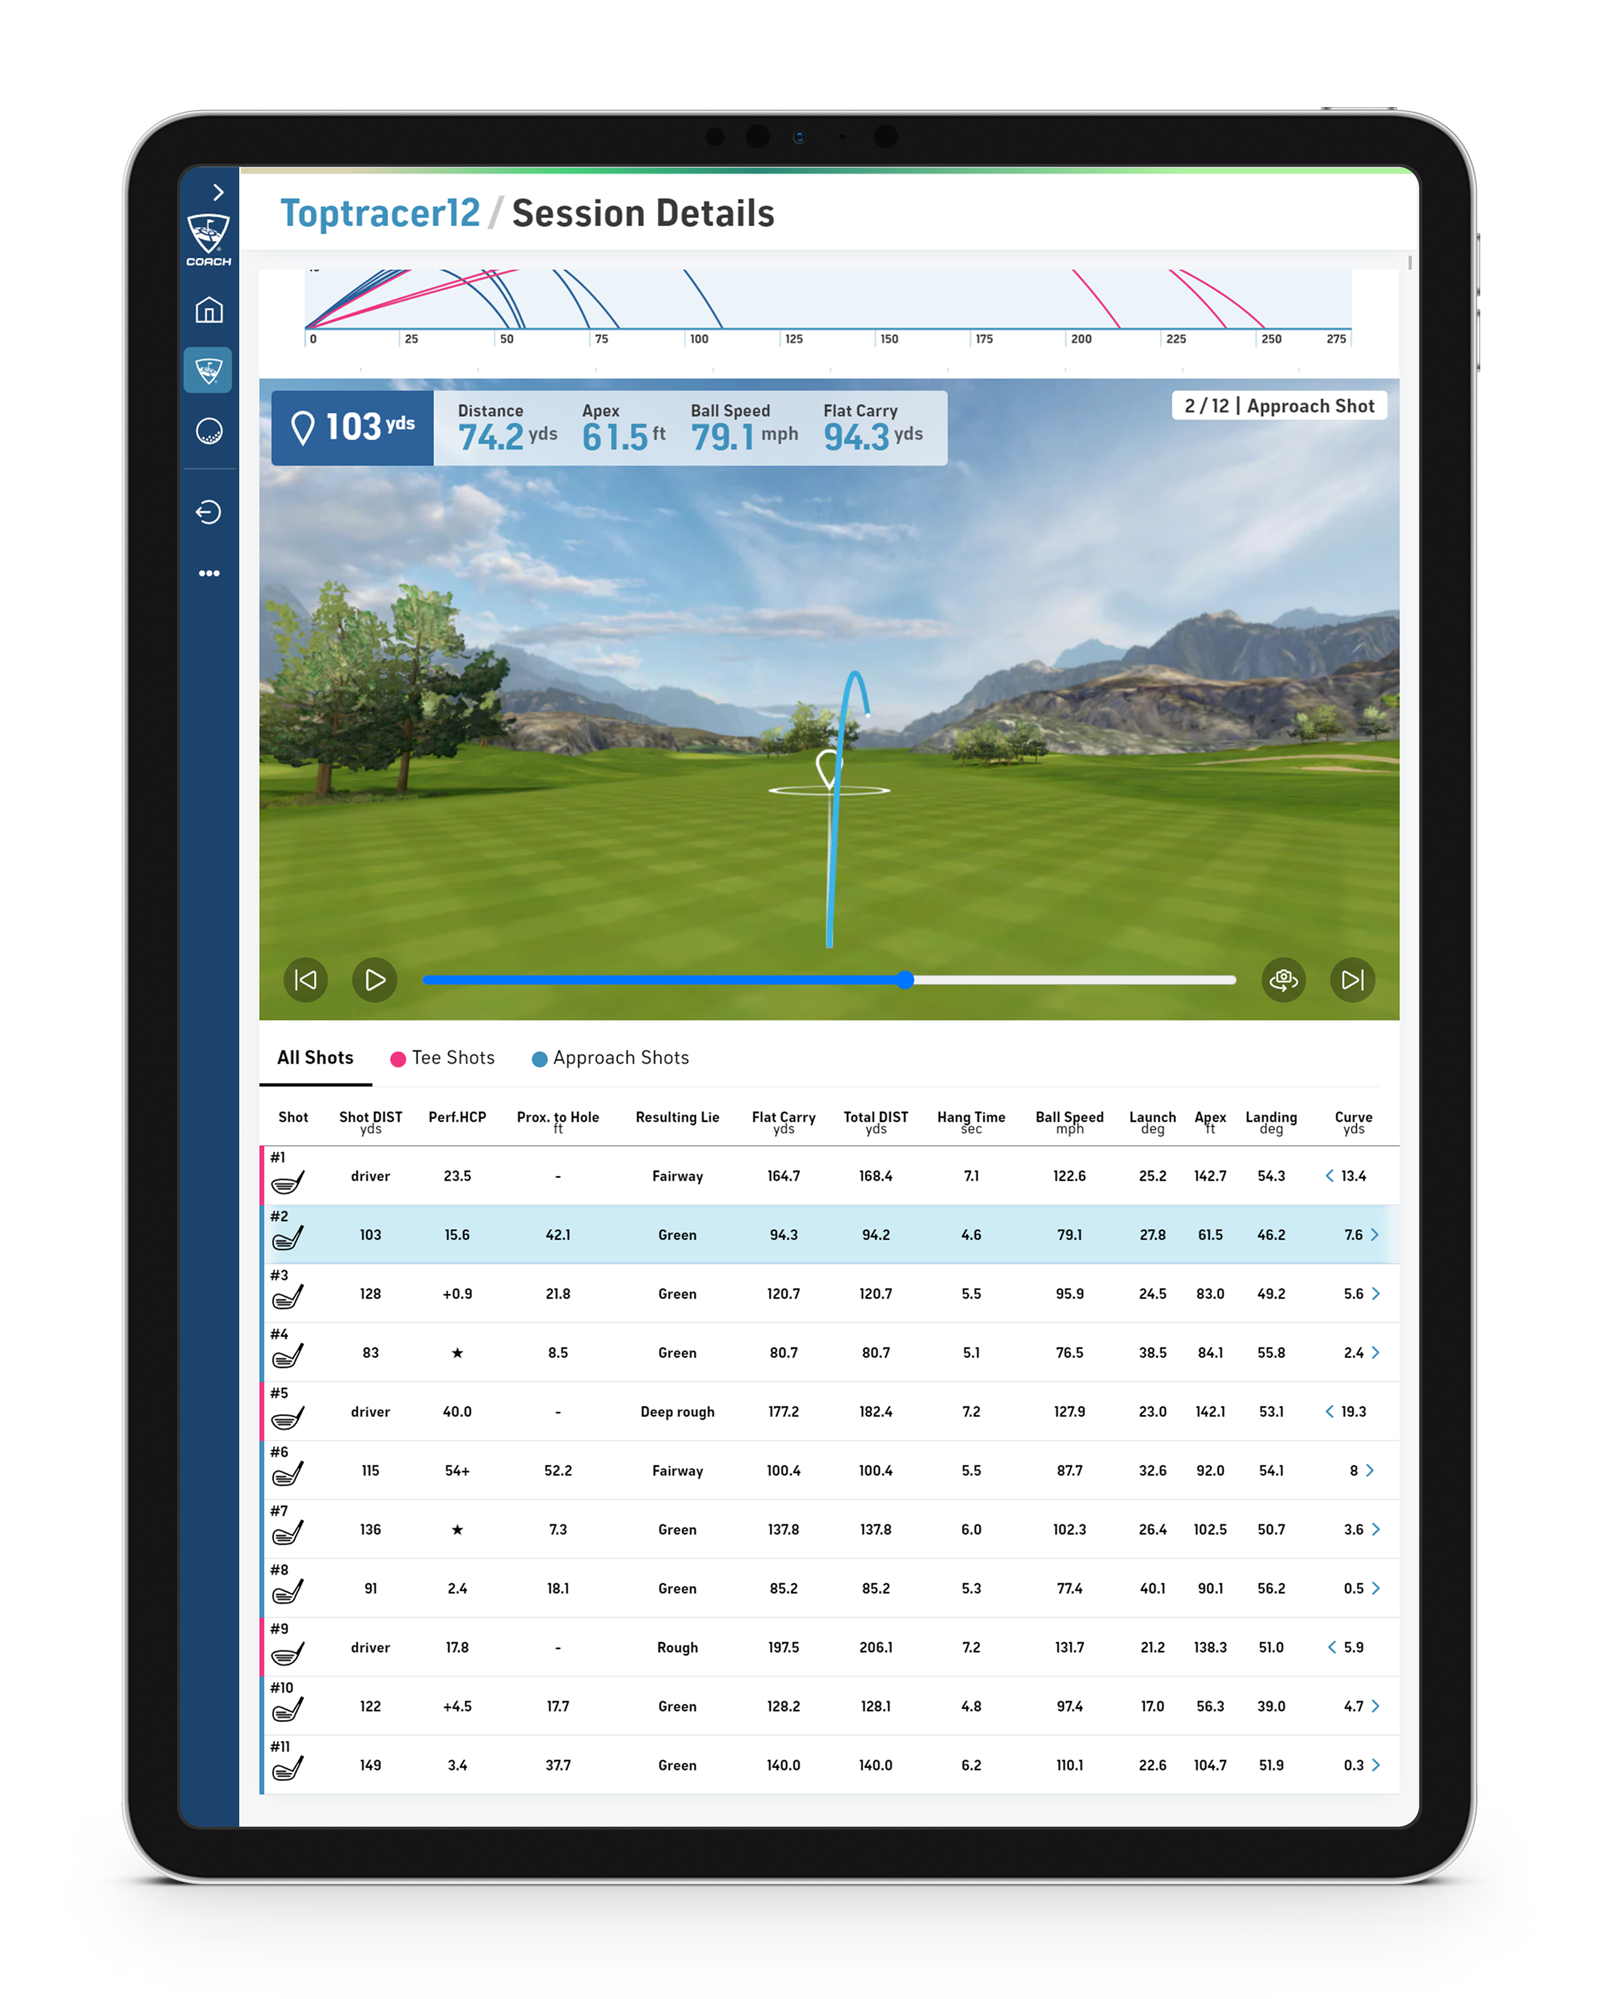 Toptracer Coach Screen: Toptracer12